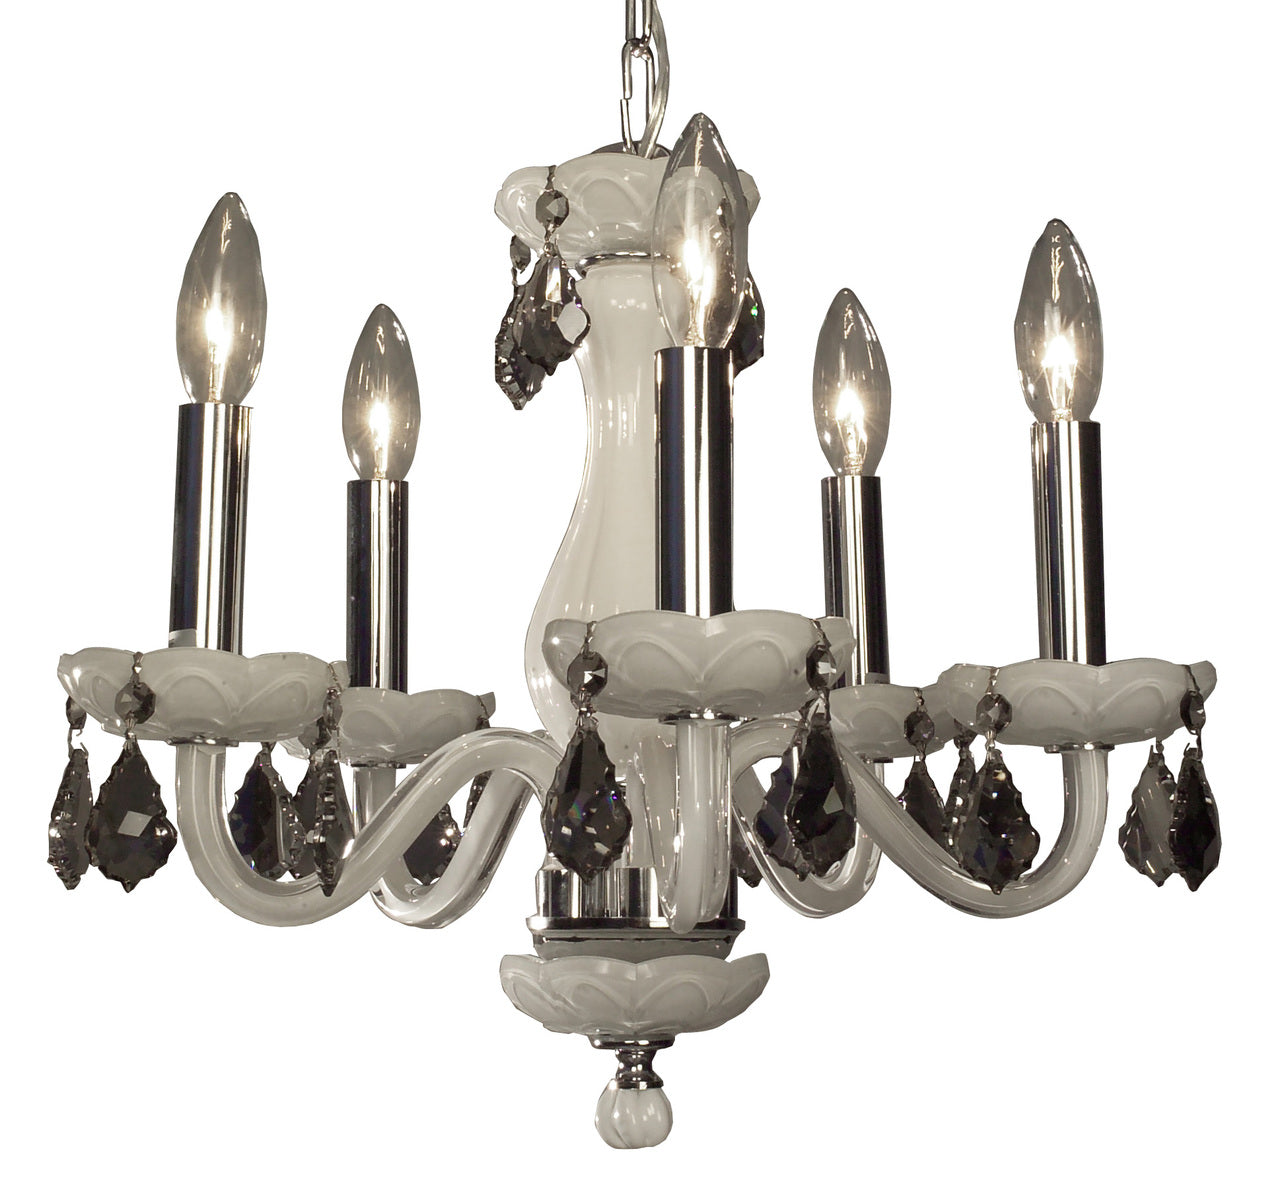 Classic Lighting 82045 WHT SMK Monaco Crystal Chandelier in White (Imported from Spain)